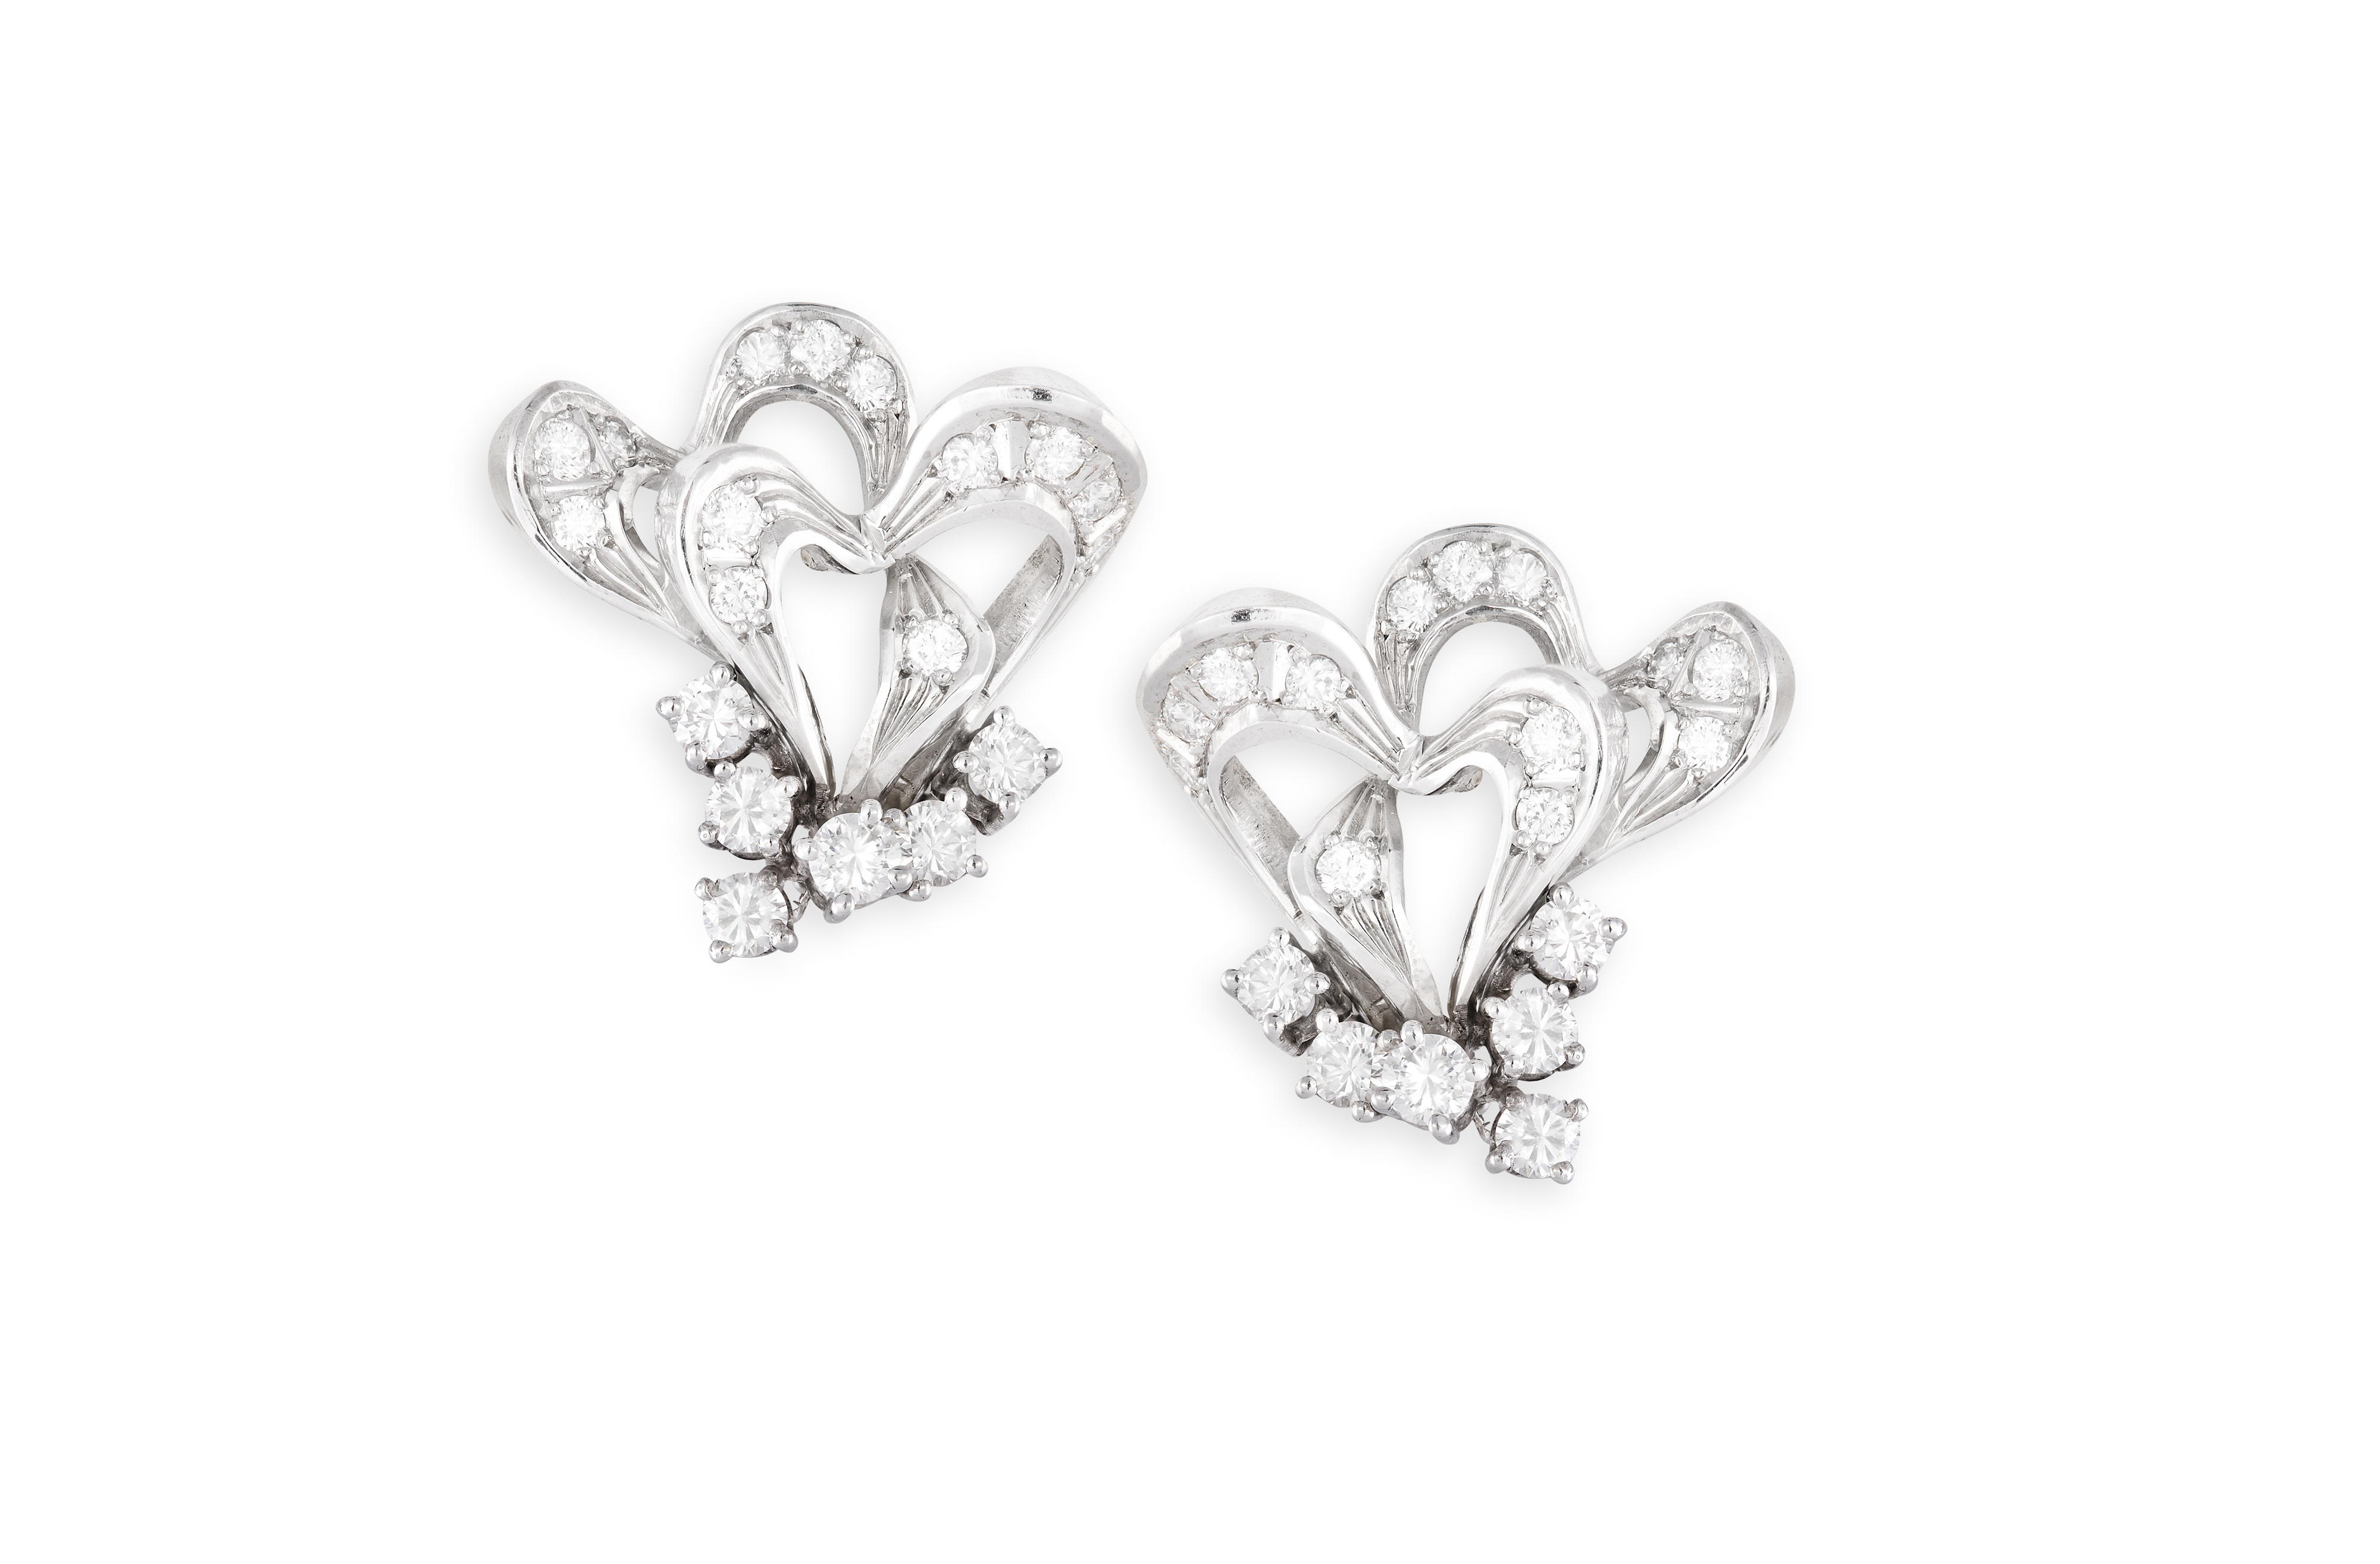 A PAIR OF DIAMOND EARRINGS, each of openwork scroll design, set throughout with round brilliant-